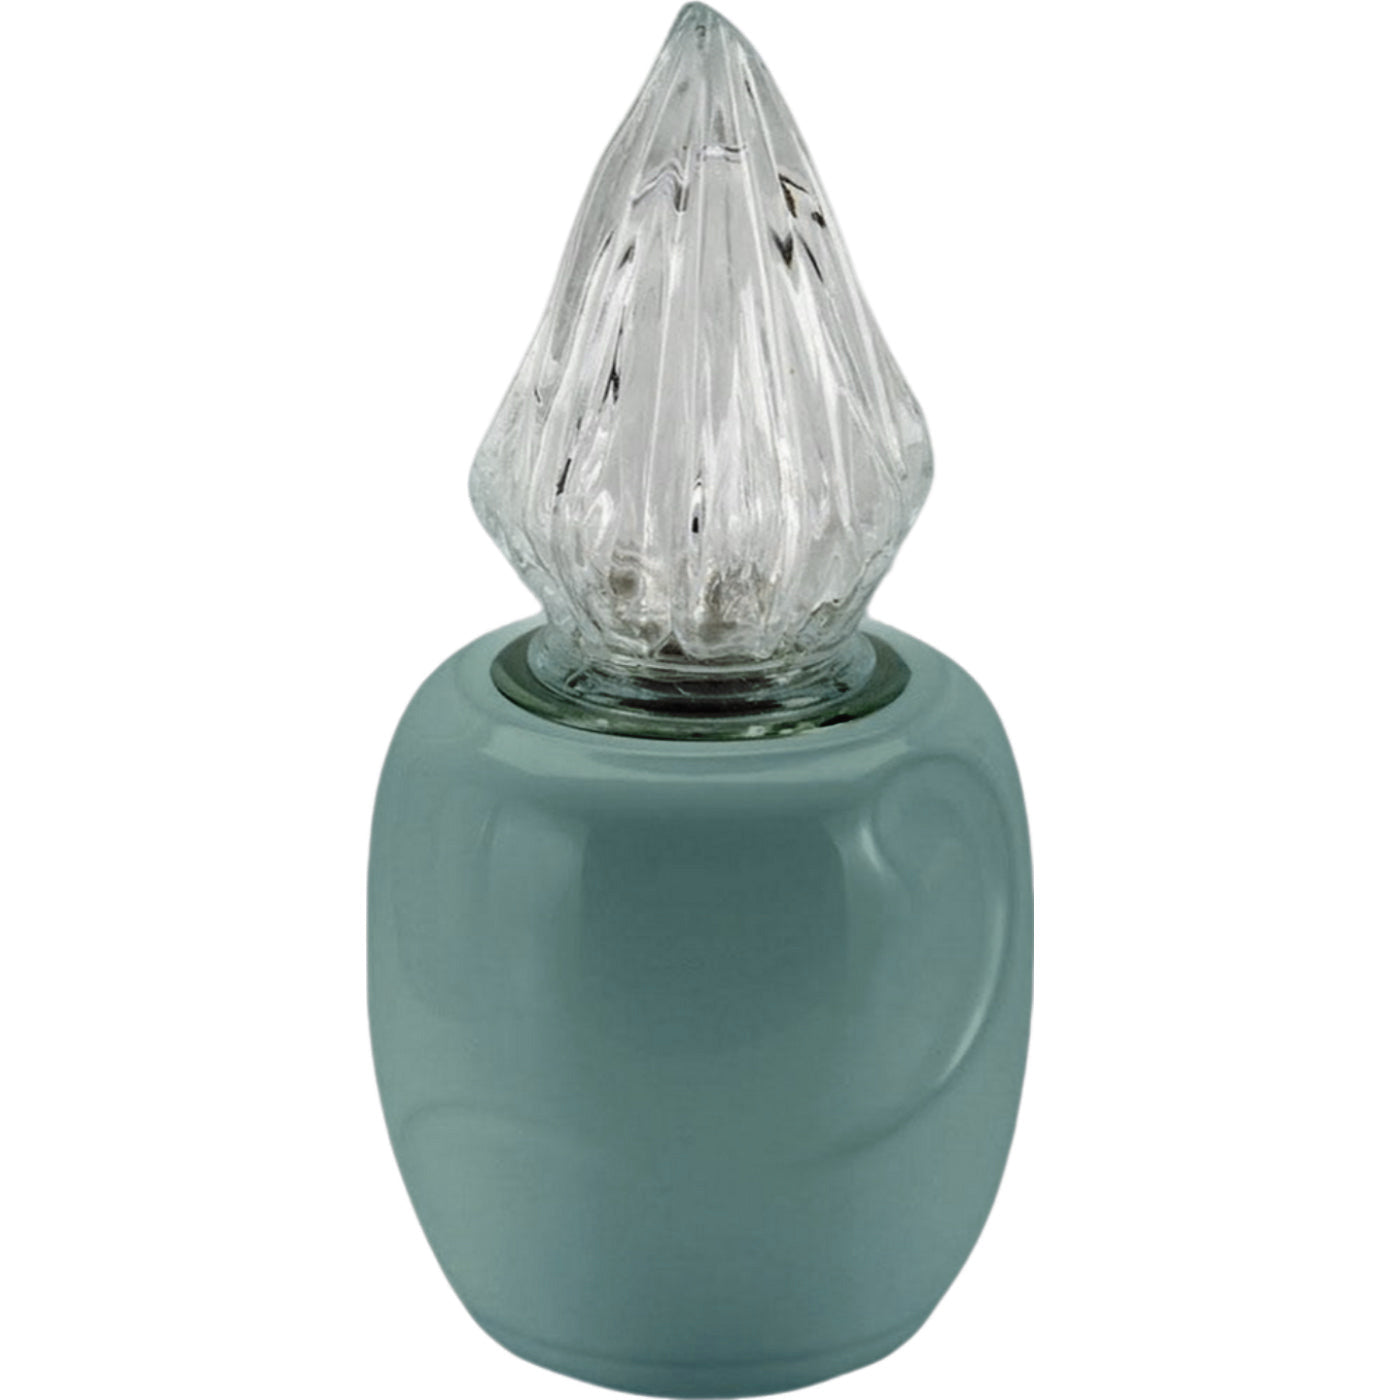 Grave light Sharon green 10x10cm - 3.9x3.9in In green porcelain, wall attached SH126P/V